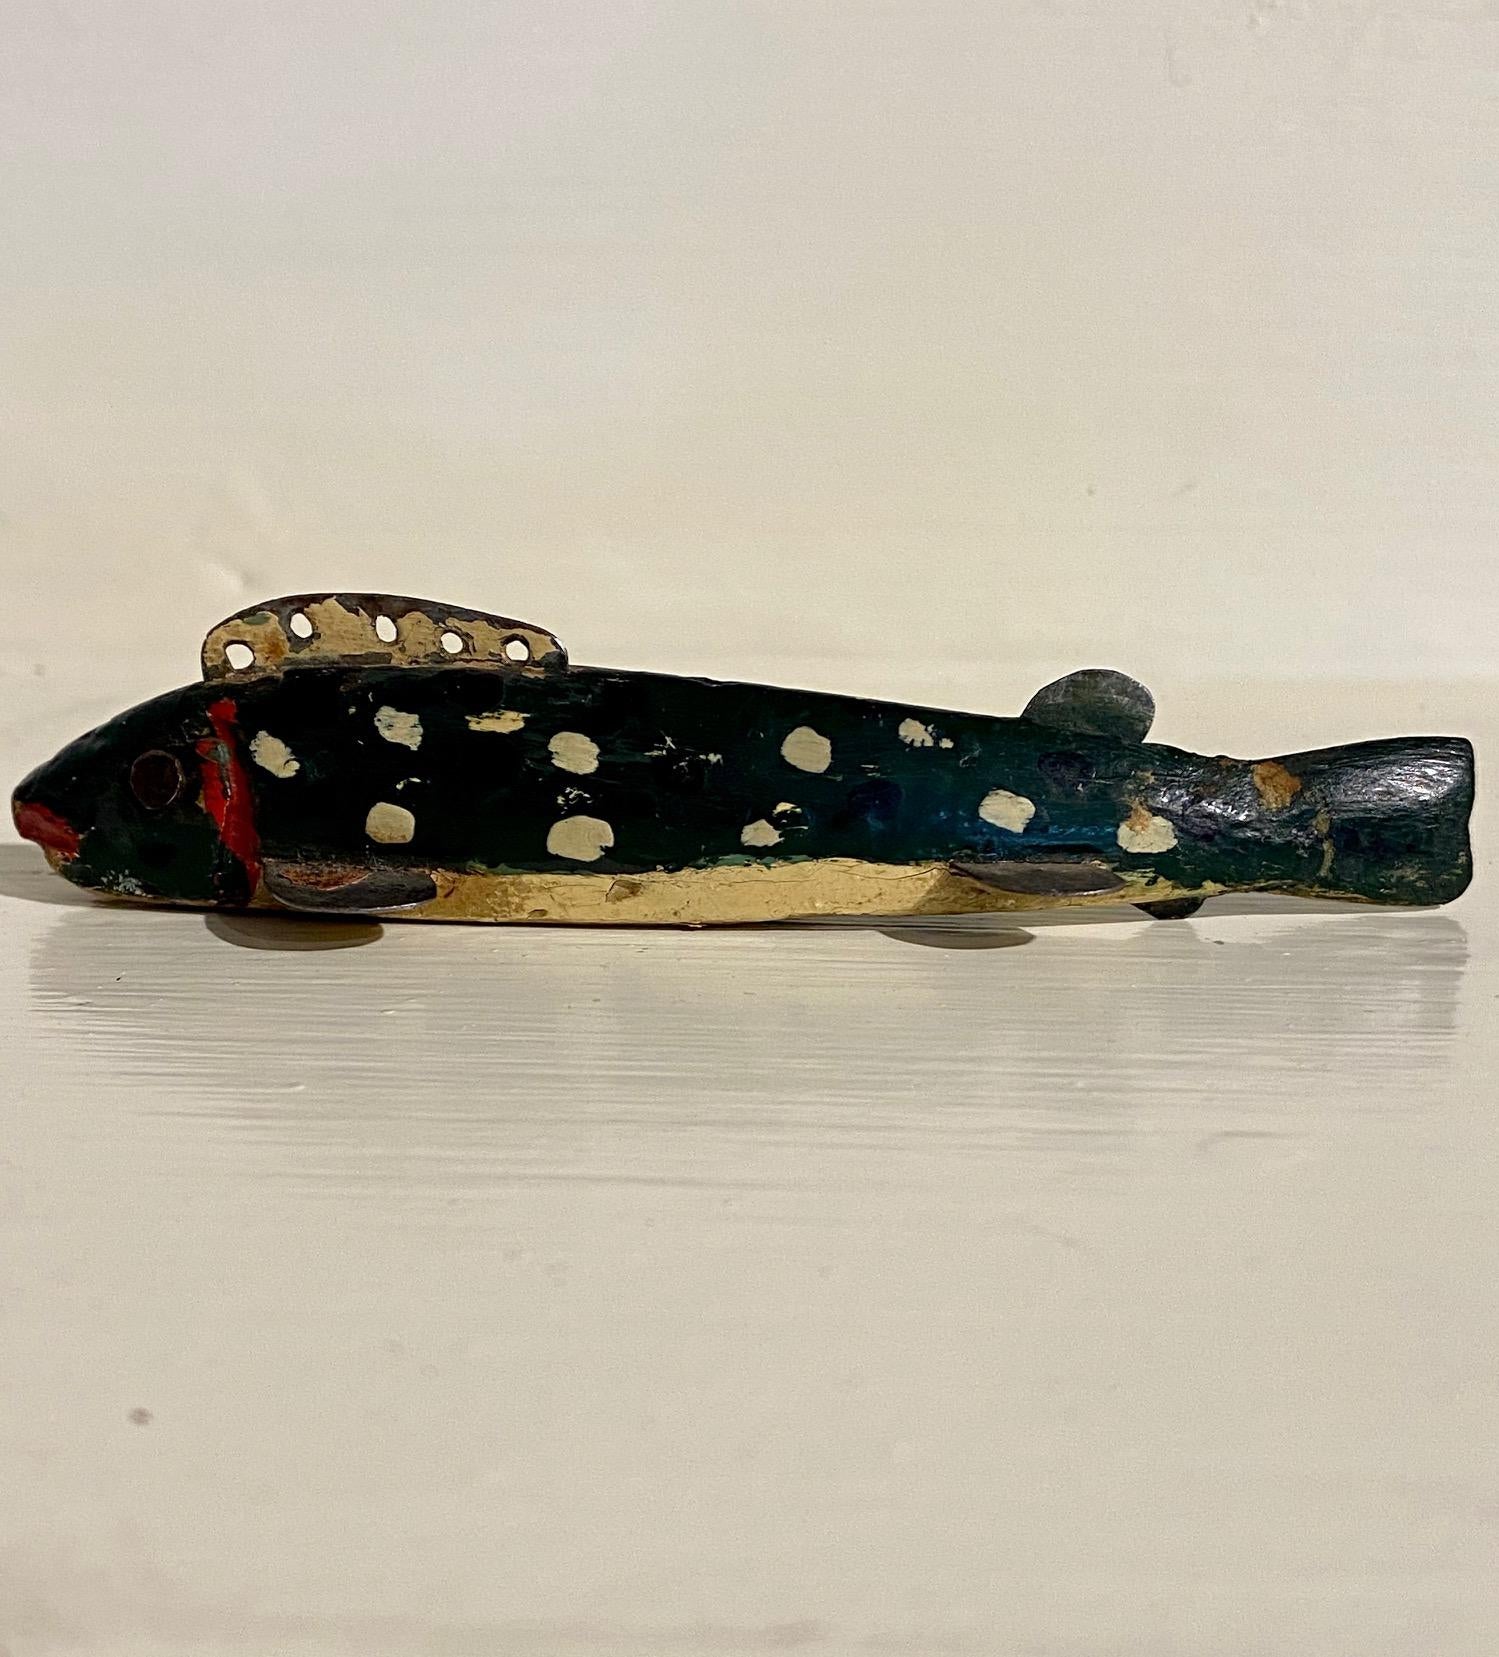 Oscar Peterson Minnow Decoy repainted by Jess Ramey, Cadillac, Michigan, circa 1930, an early Period II Peterson working ice fishing decoy that received an in-use working repaint by Jess Ramey in a minnow pattern with cream dots on a dark green